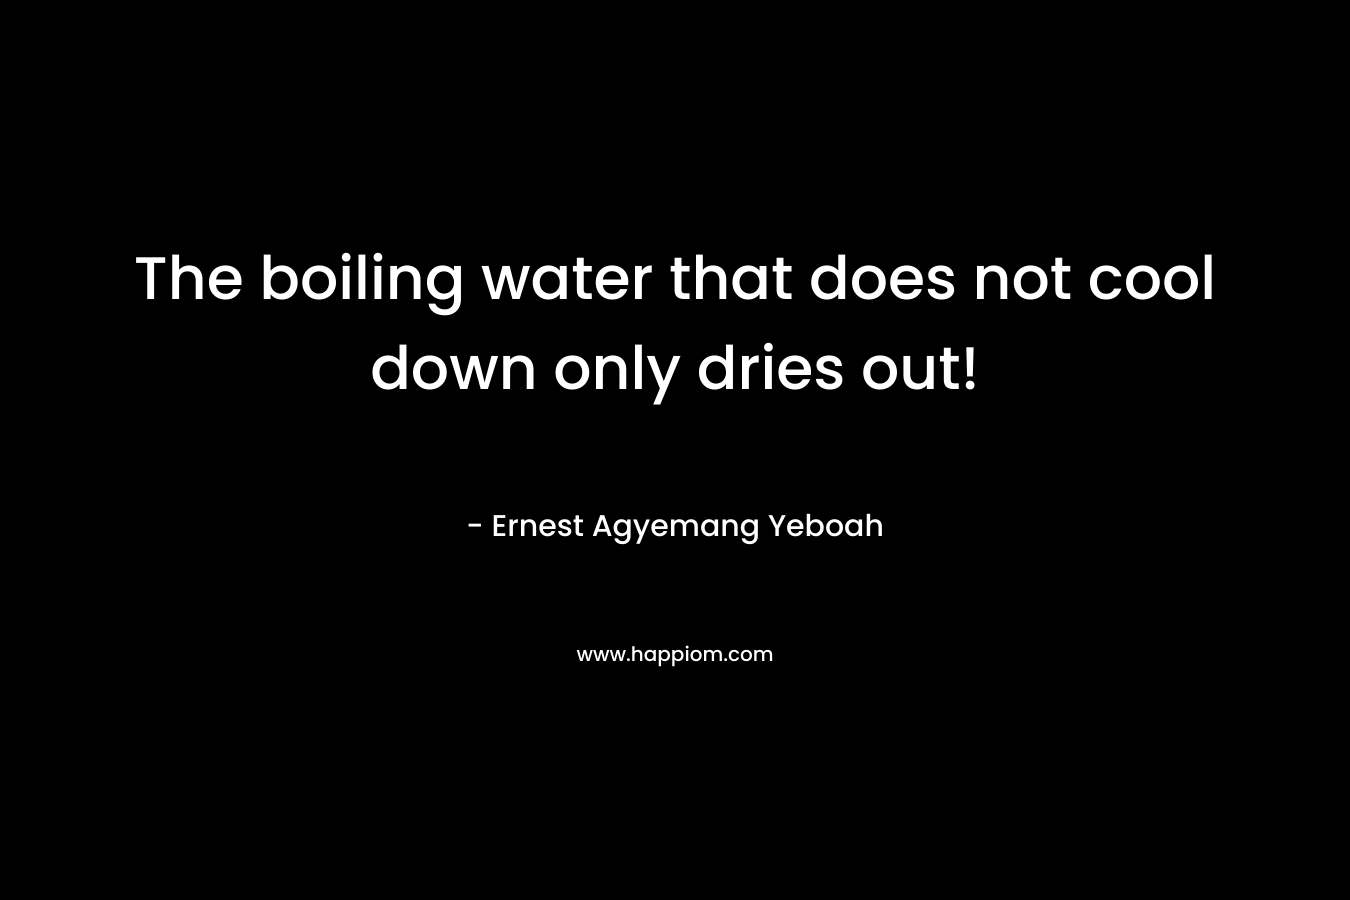 The boiling water that does not cool down only dries out! – Ernest Agyemang Yeboah